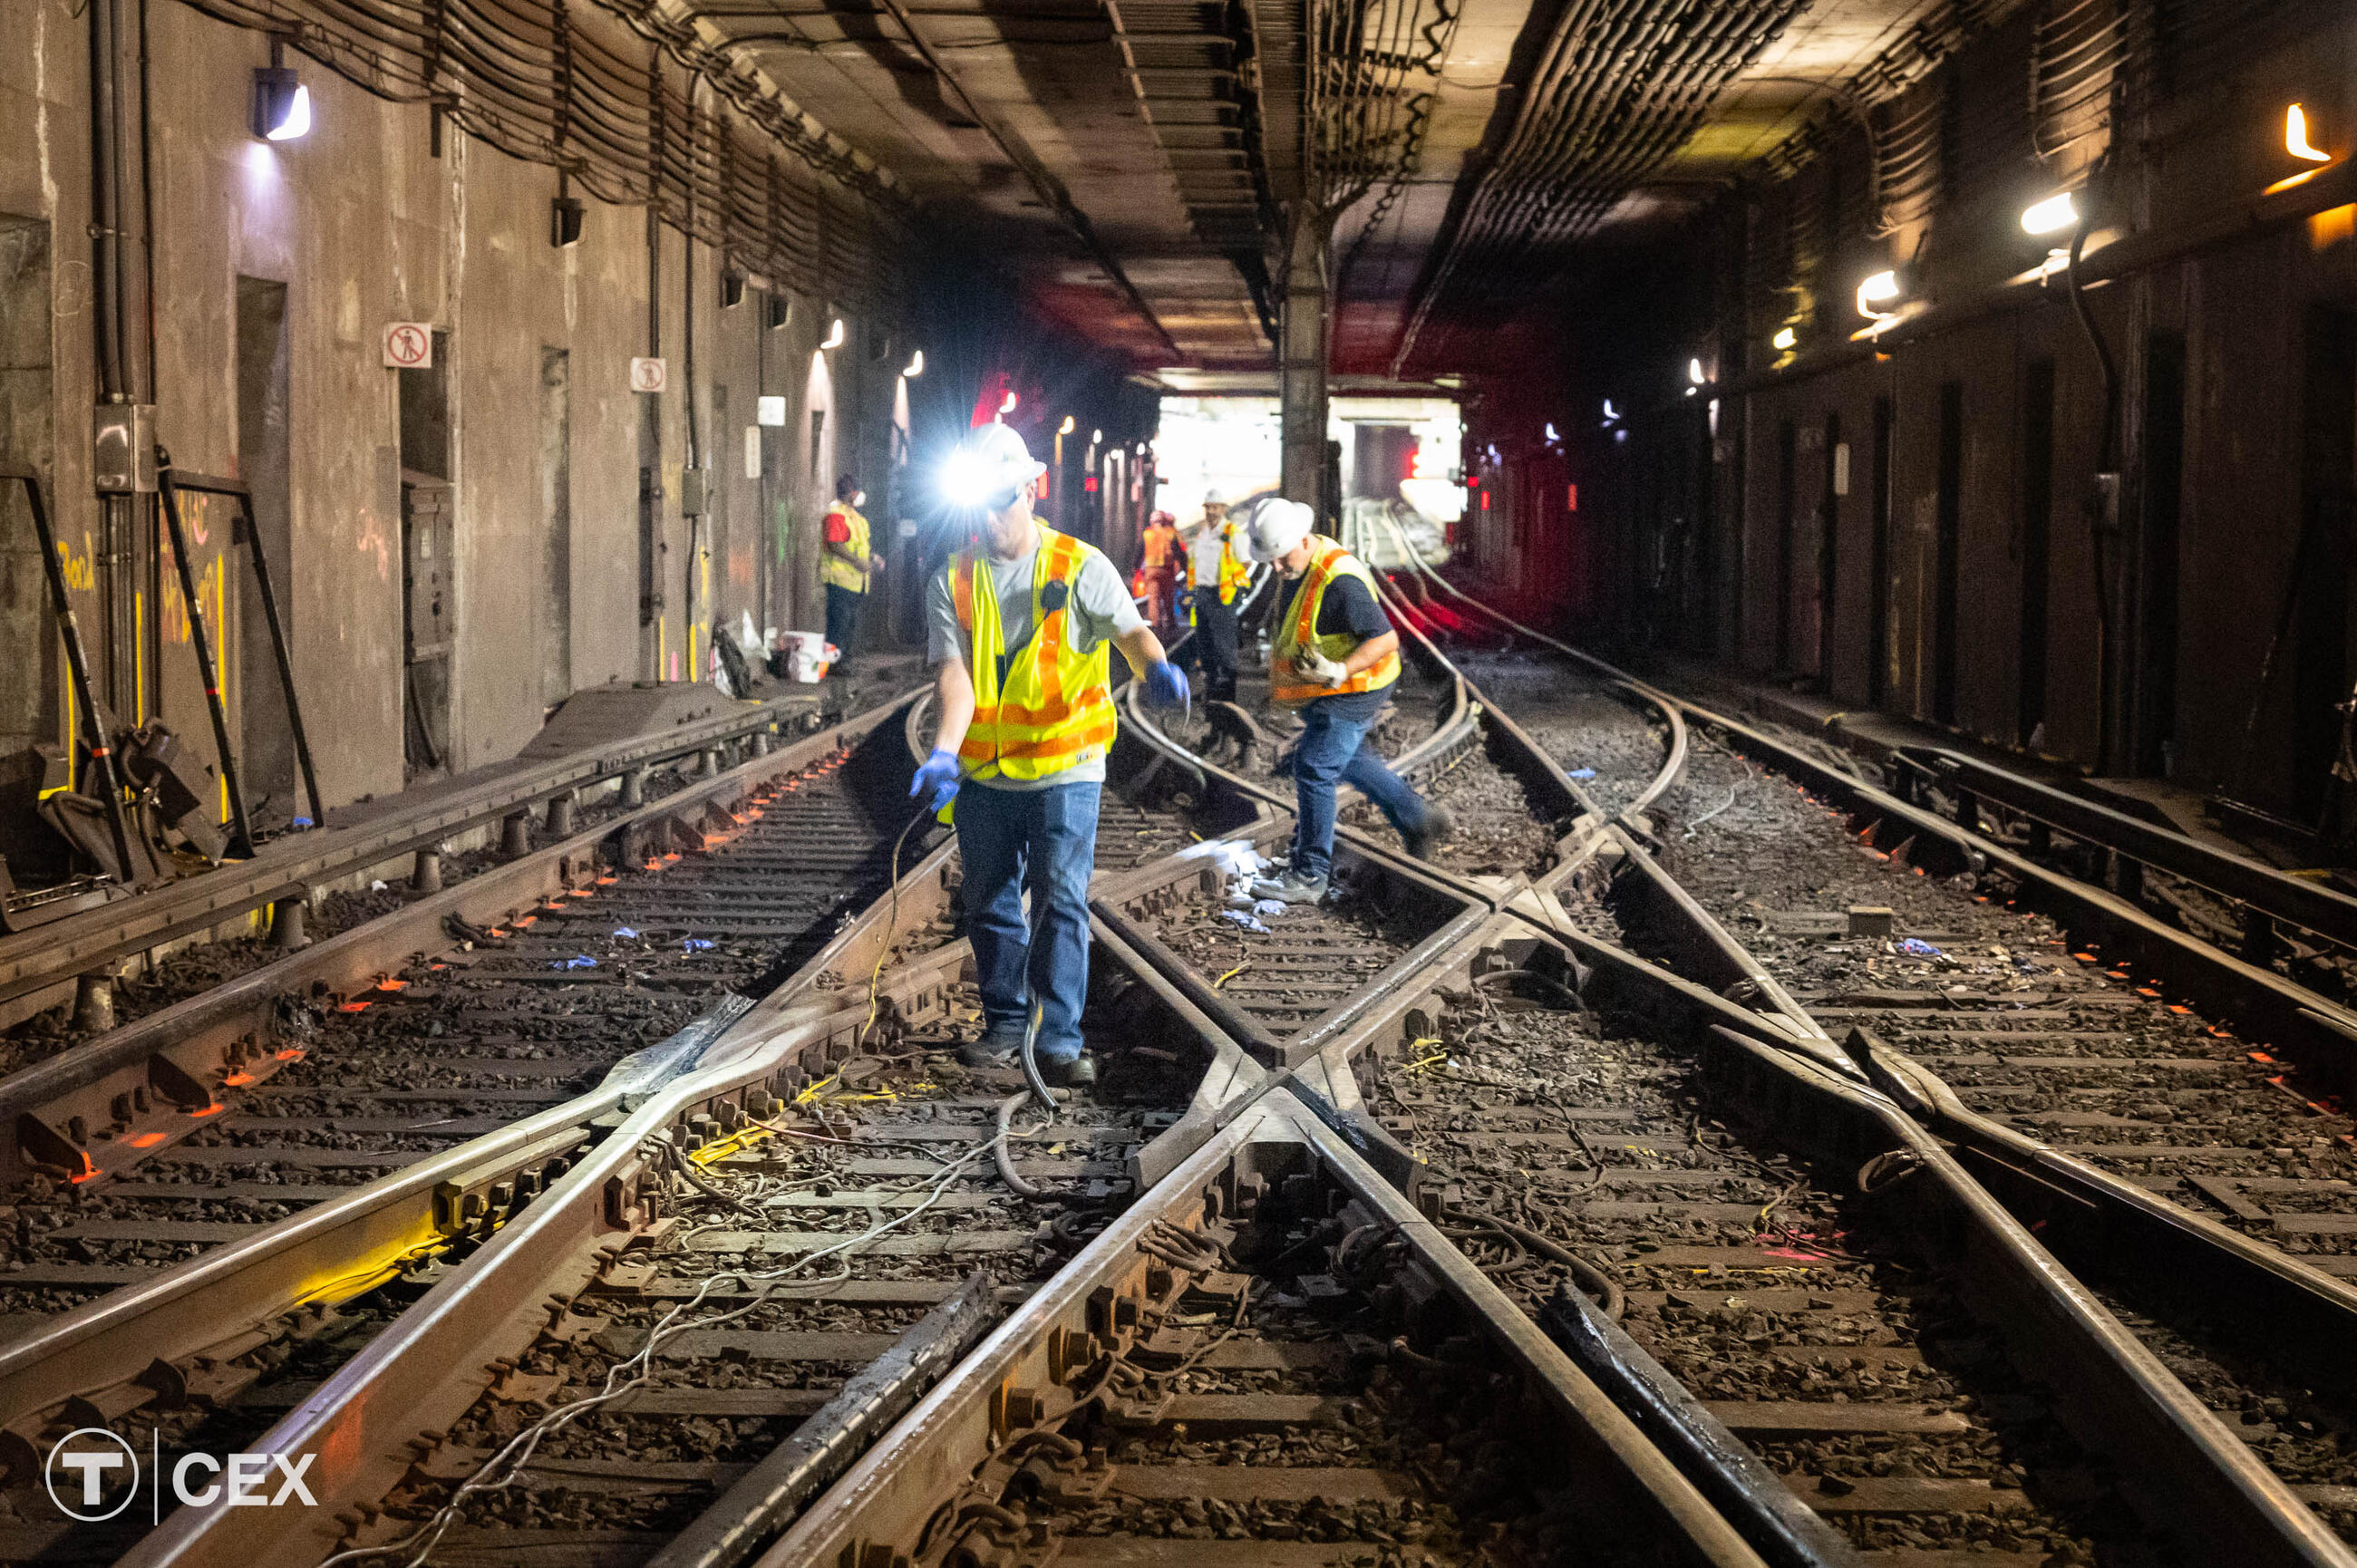 Crews also performed power cable improvements along the Orange Line. Complimentary photo by the MBTA Customer and Employee Experience Department.